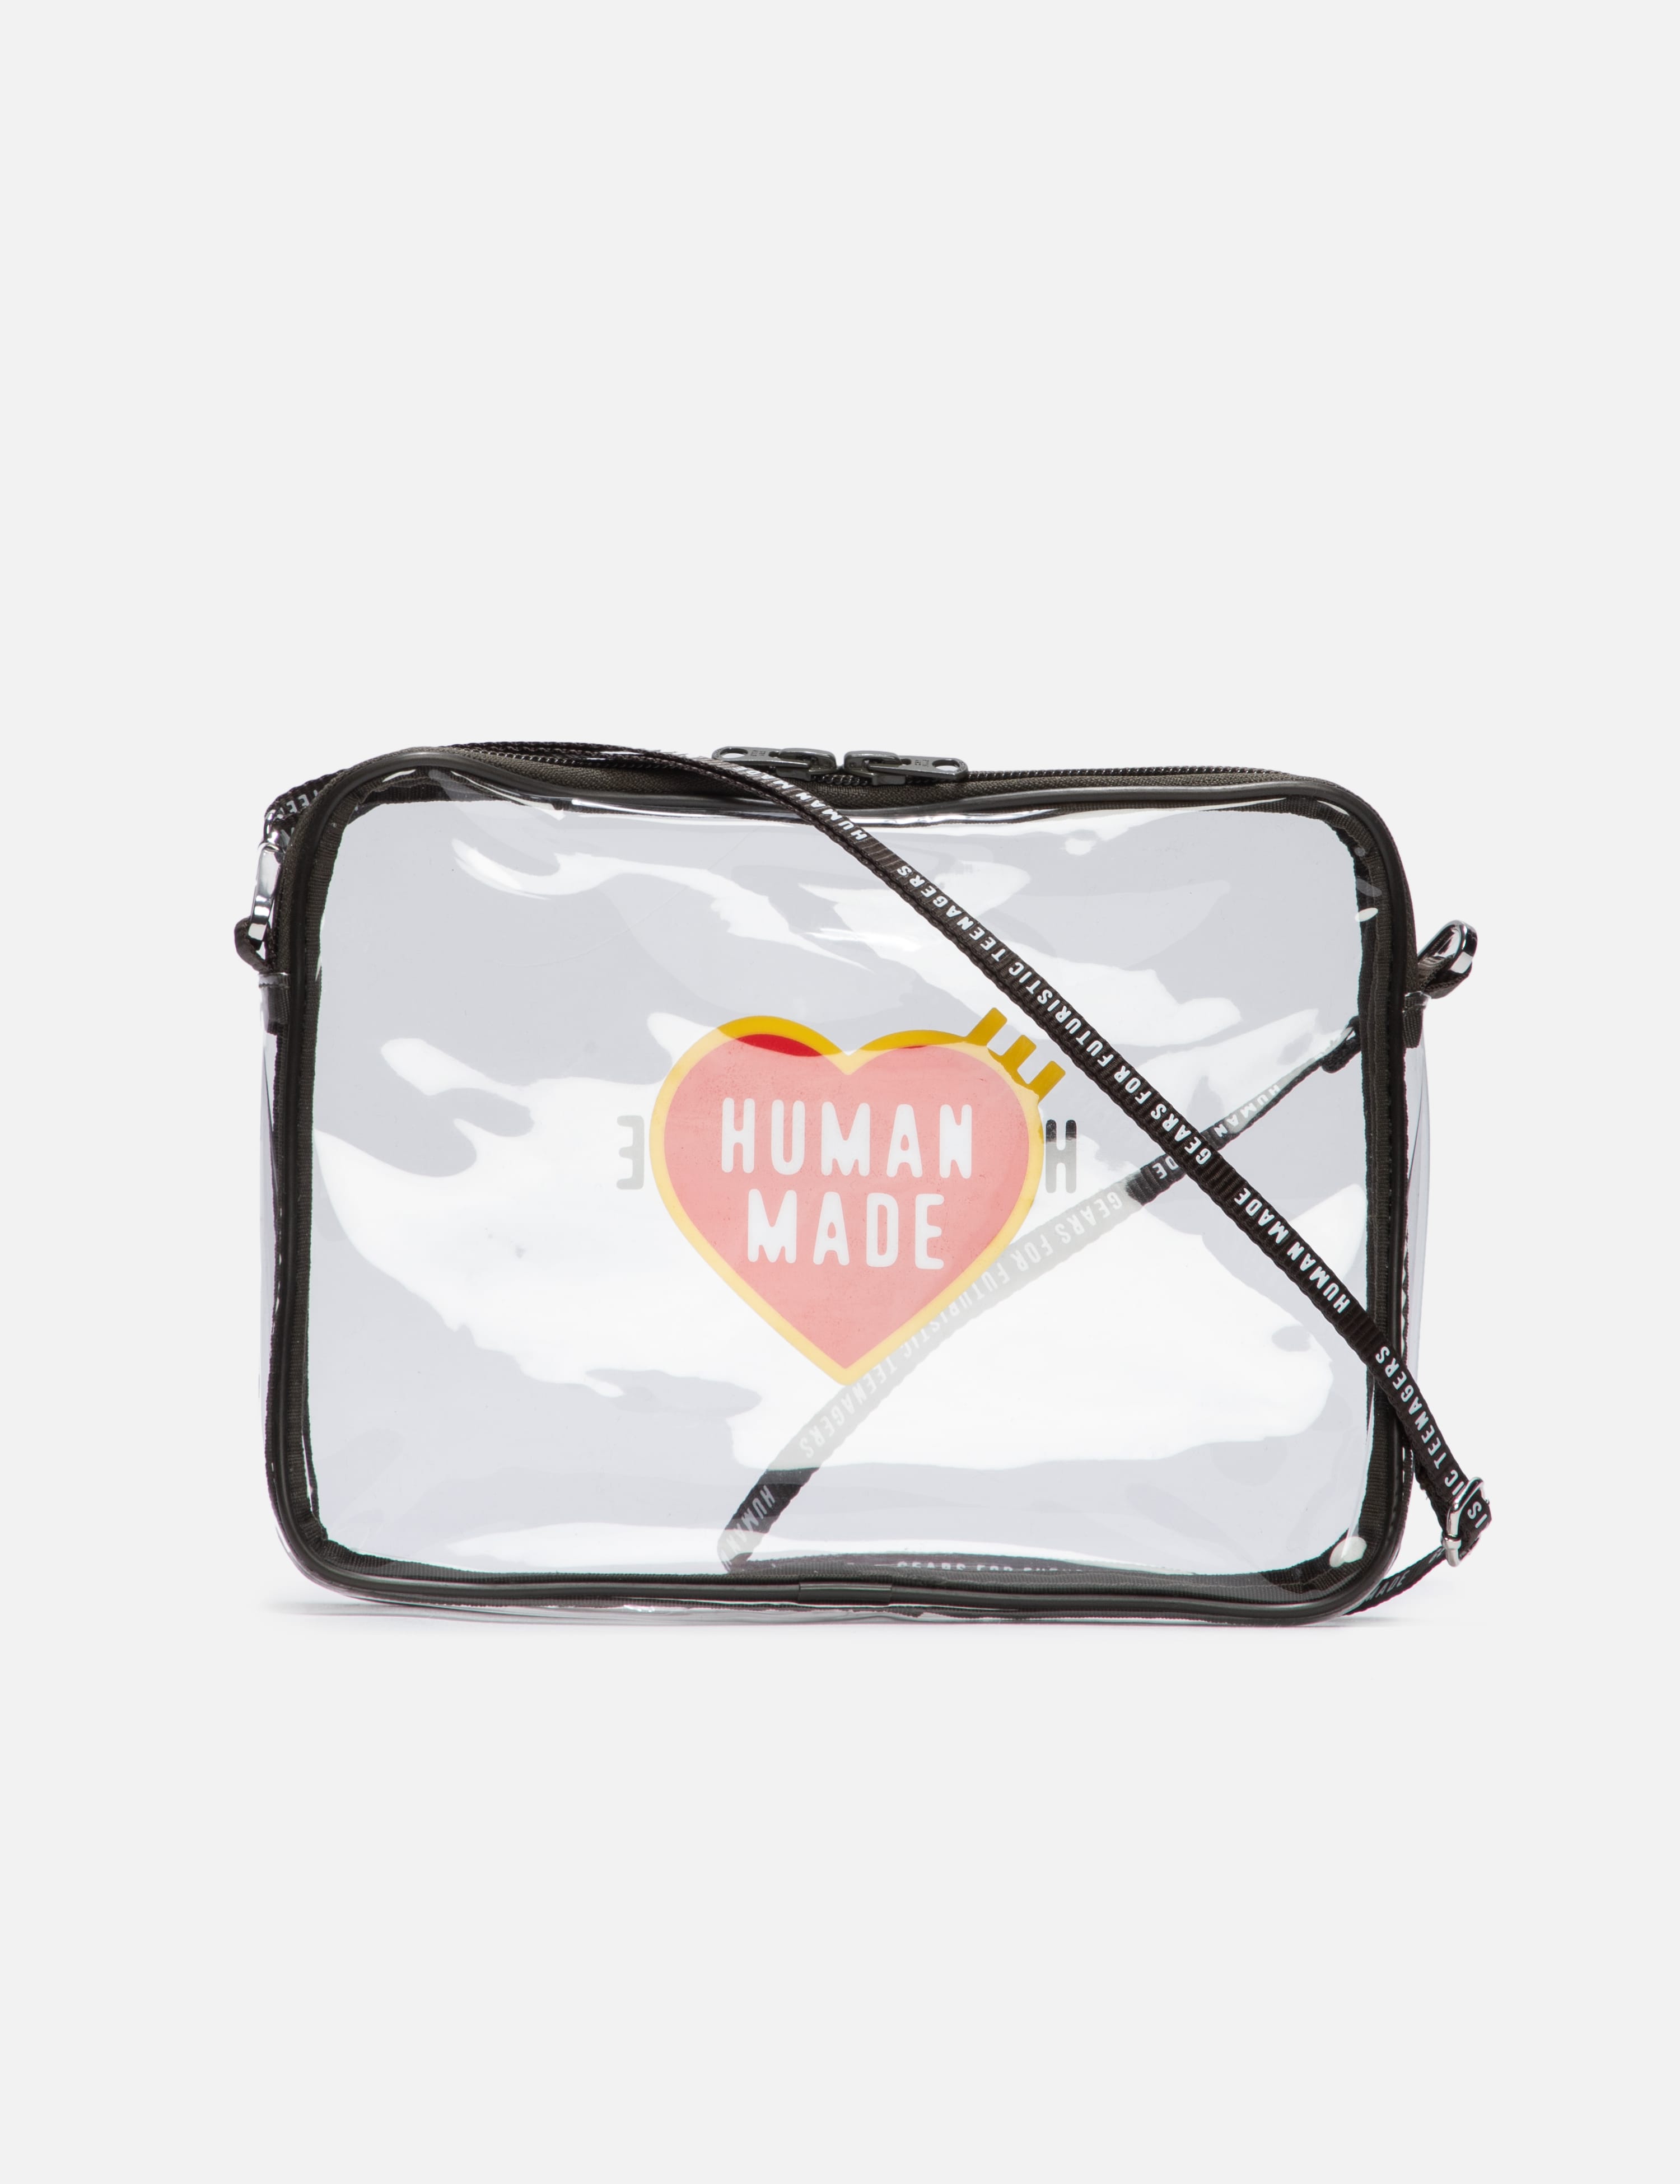 Human Made - Large PVC Pouch | HBX - Globally Curated Fashion and 